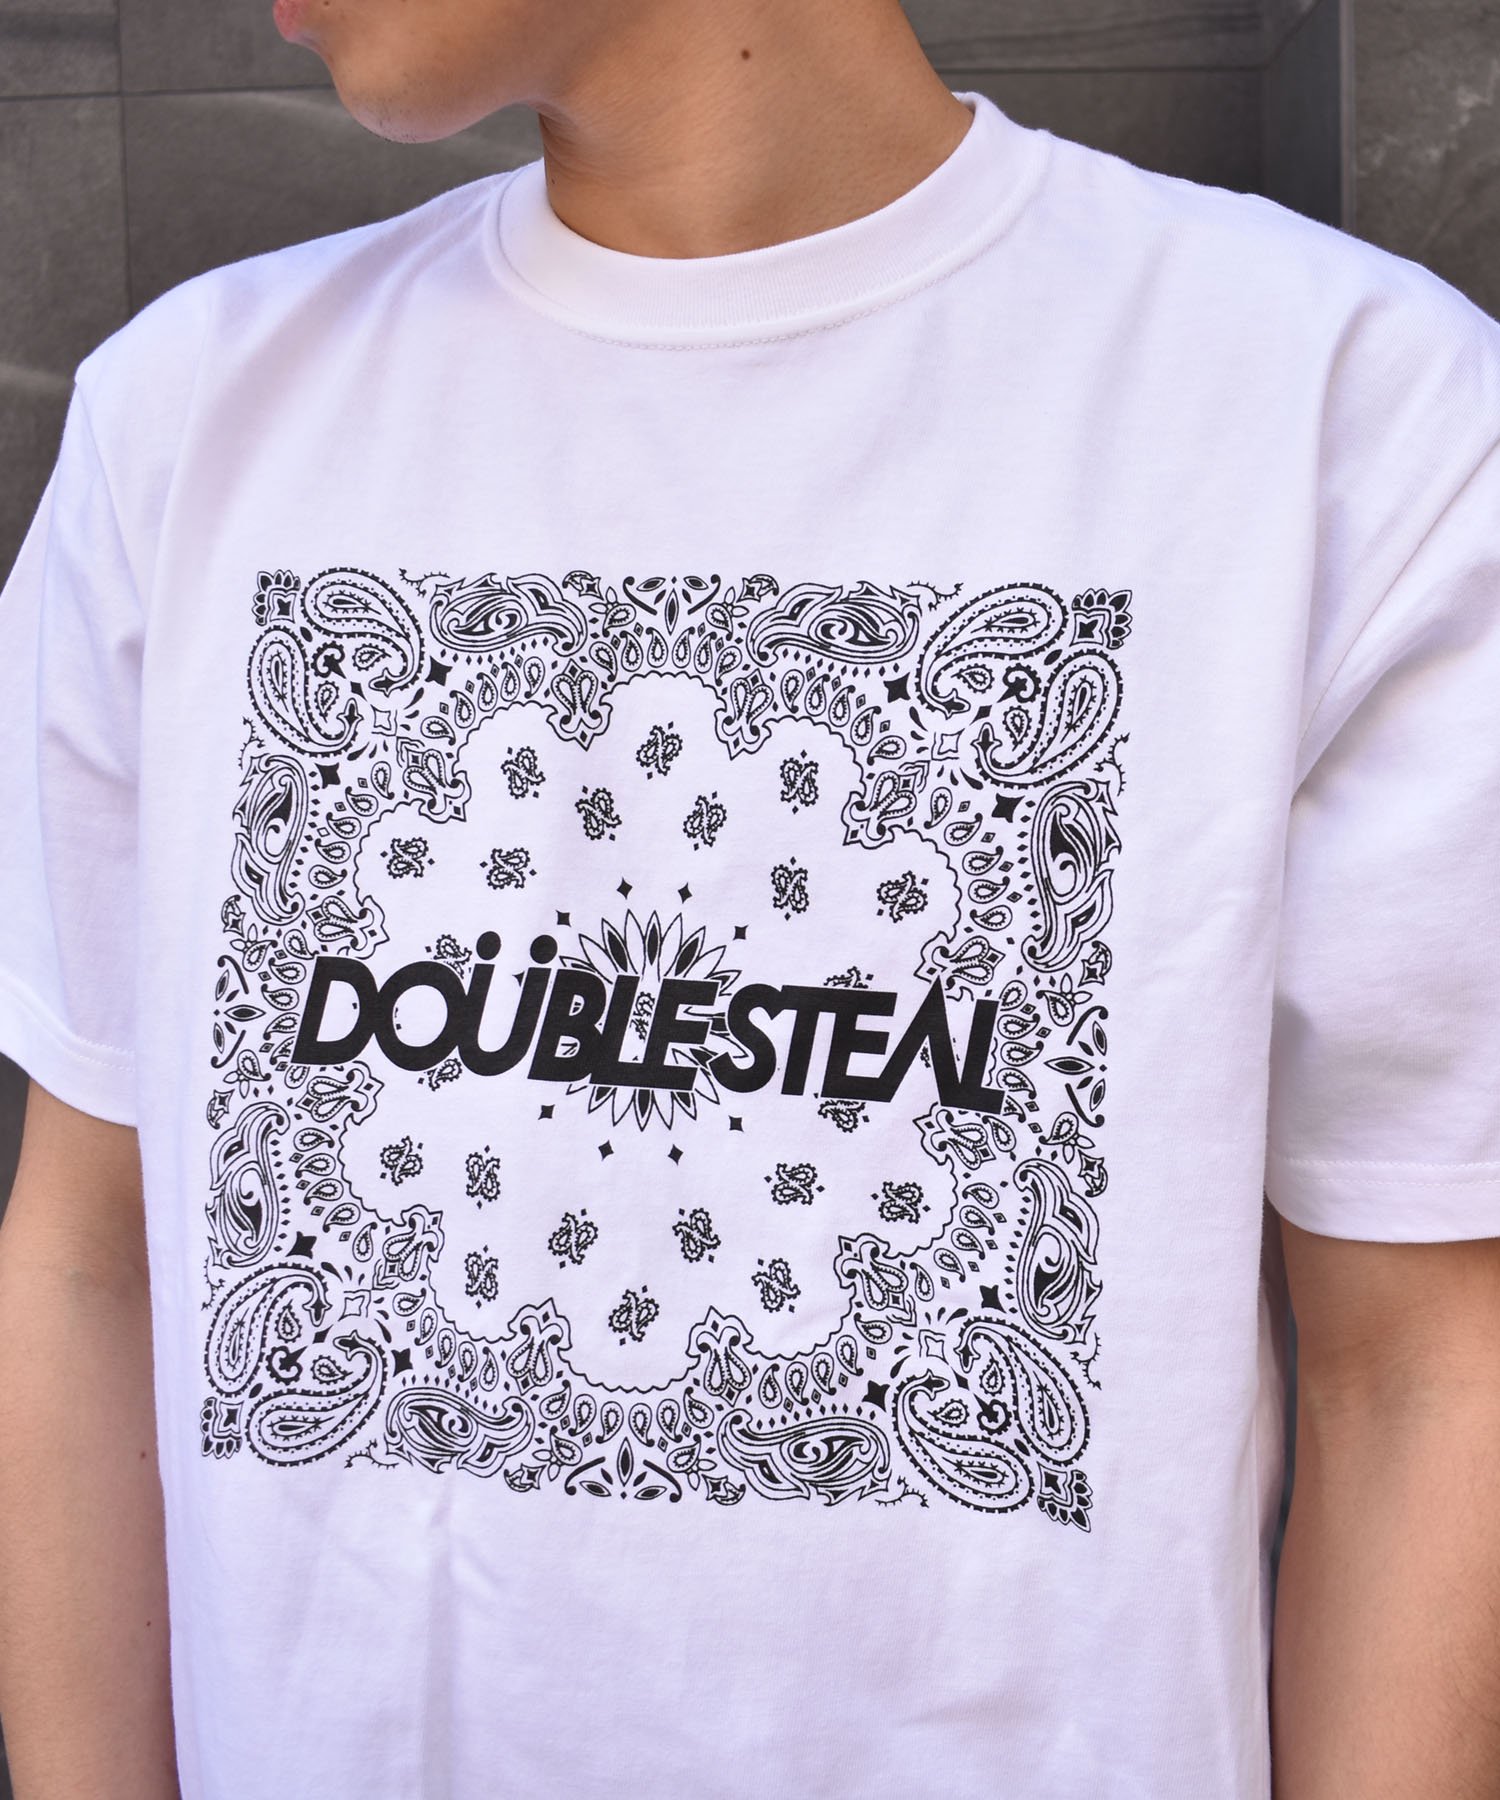 Big Paisley Heavy Tシャツ - DOUBLE STEAL ONLINE SHOP